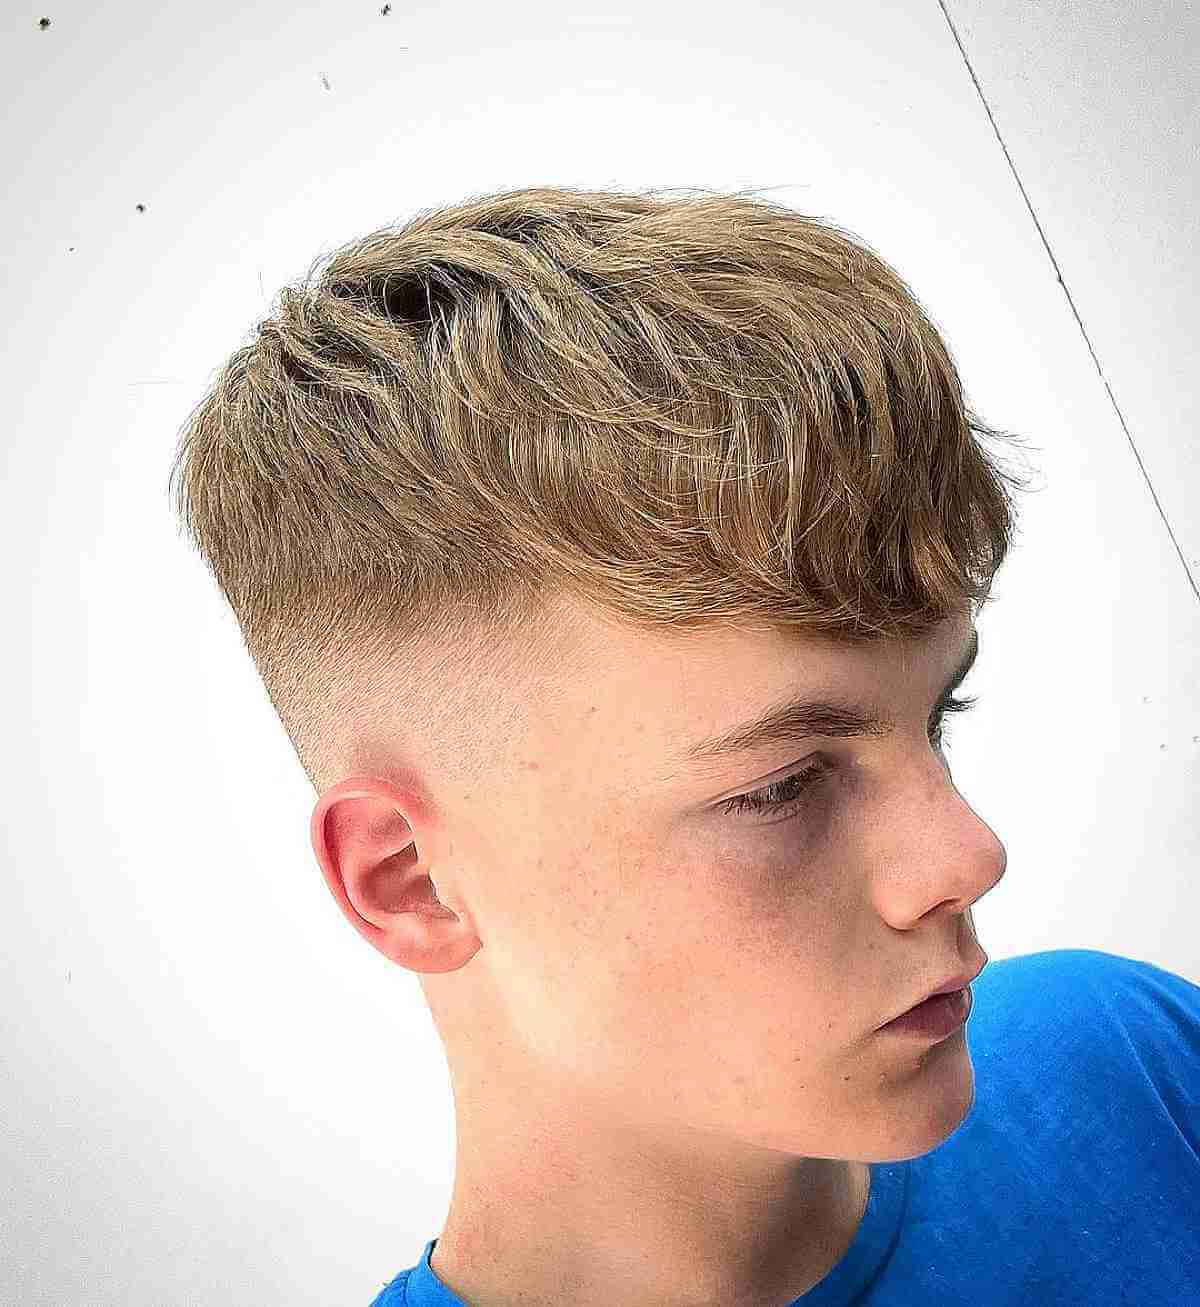 Best beard and hair style 2023 | for young boy | famous hairstyle 2023  #trending #hairstyle #beard - YouTube